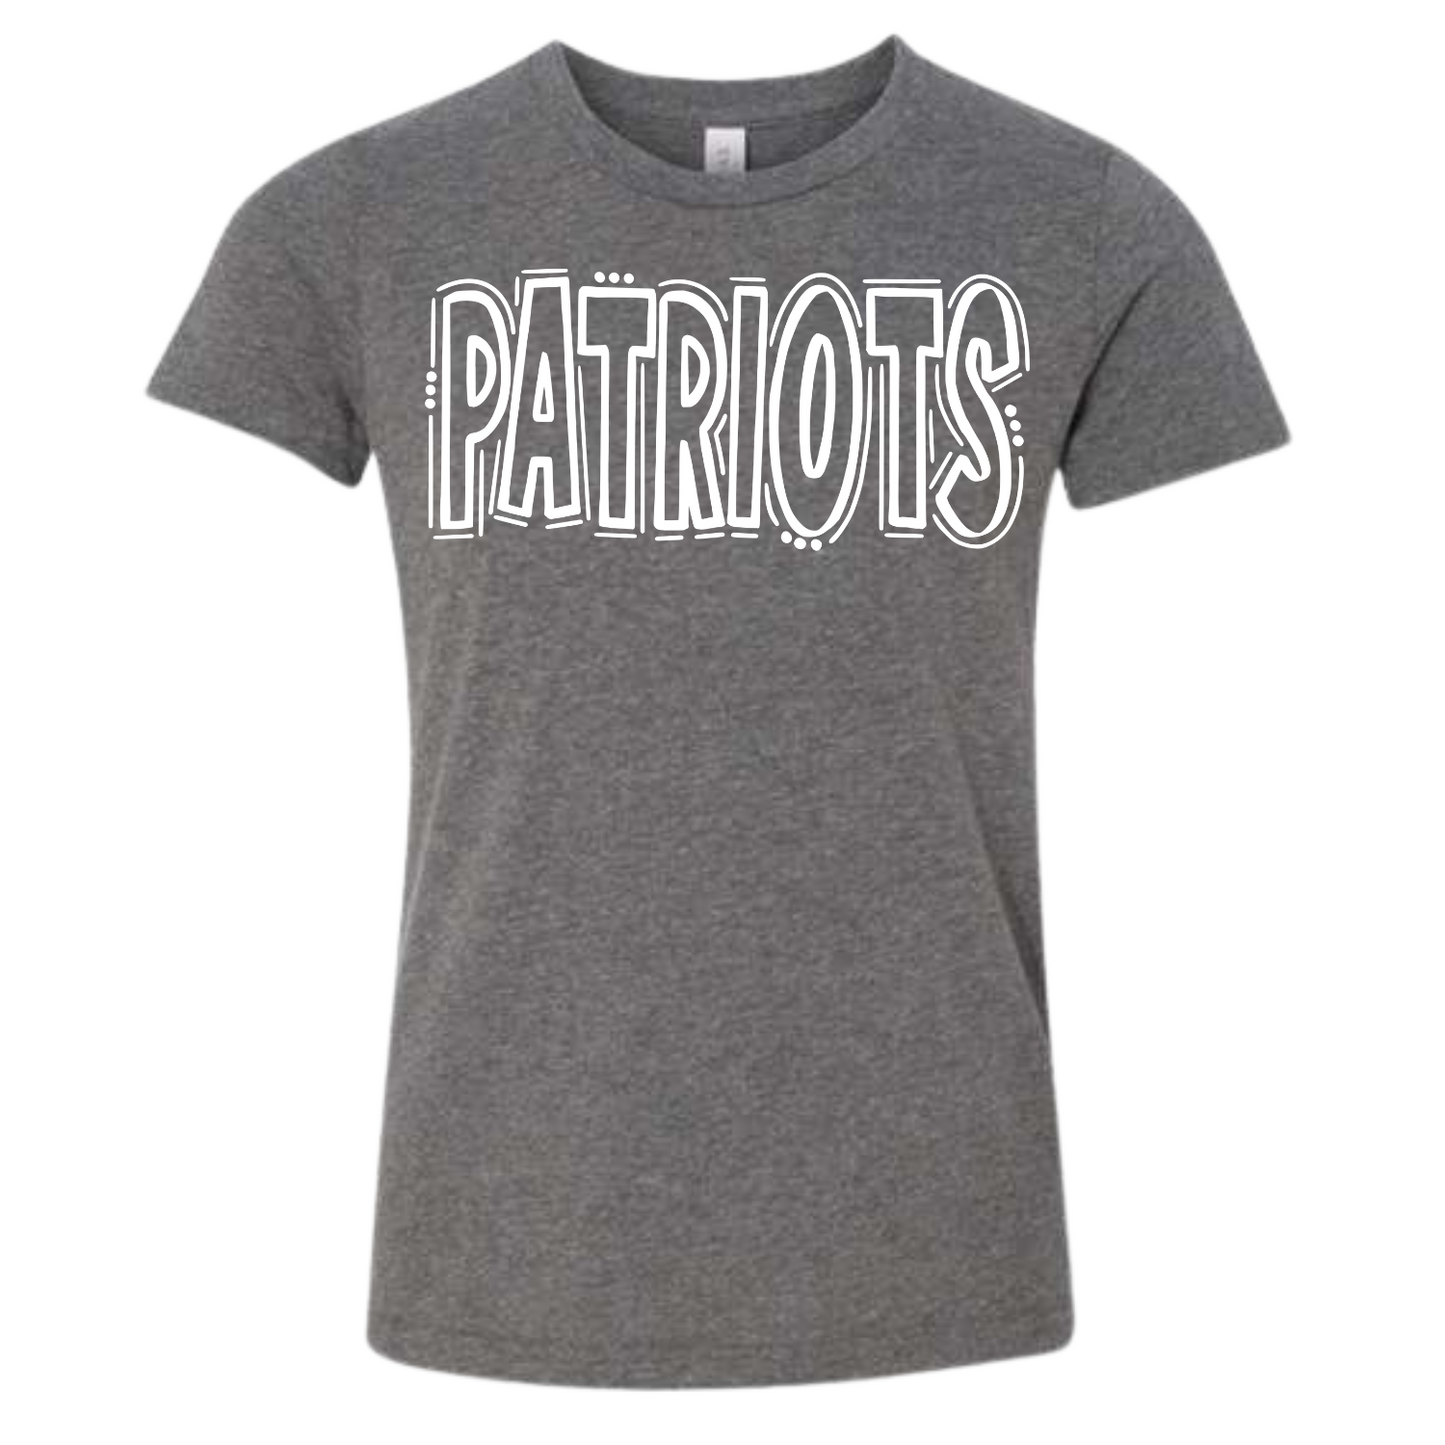 Patriots Doodle Tee Youth